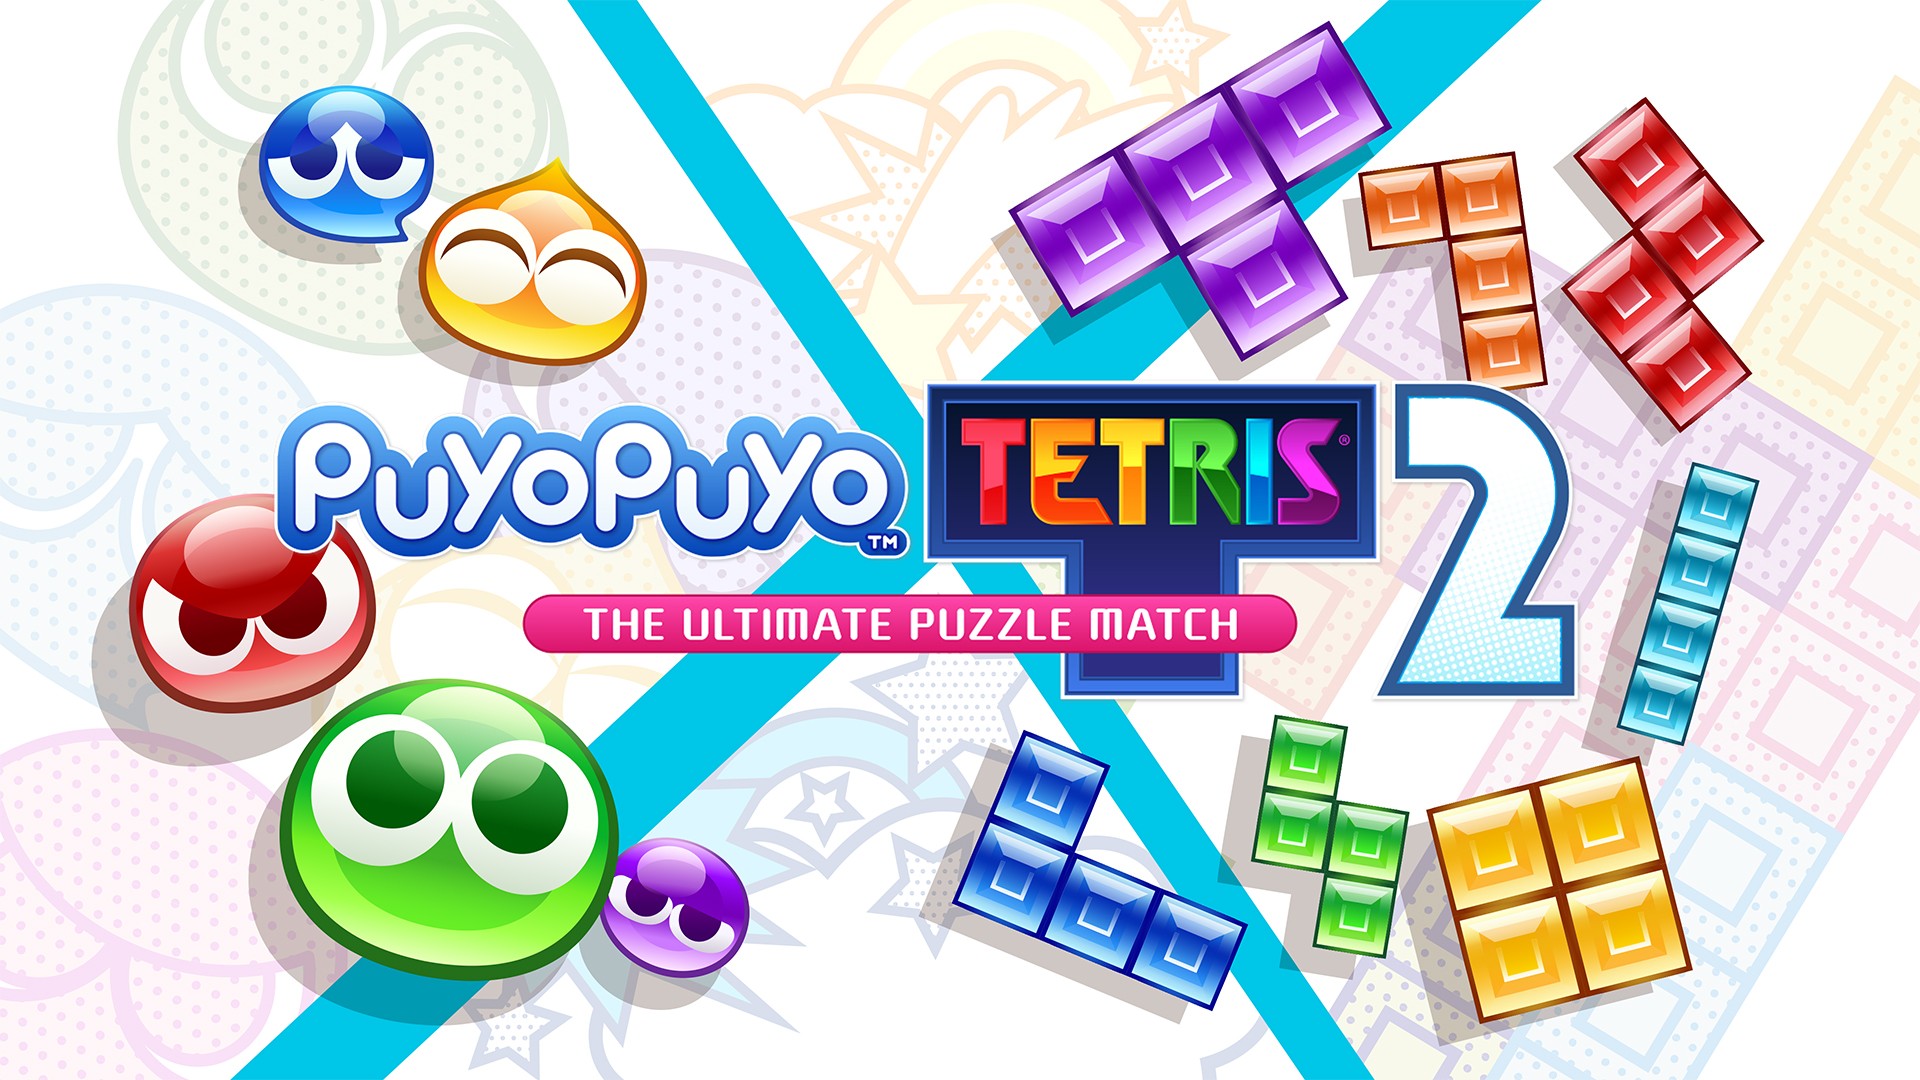 Puyo Puyo Tetris 2: The Ultimate Puzzle Match is Coming to Xbox Series